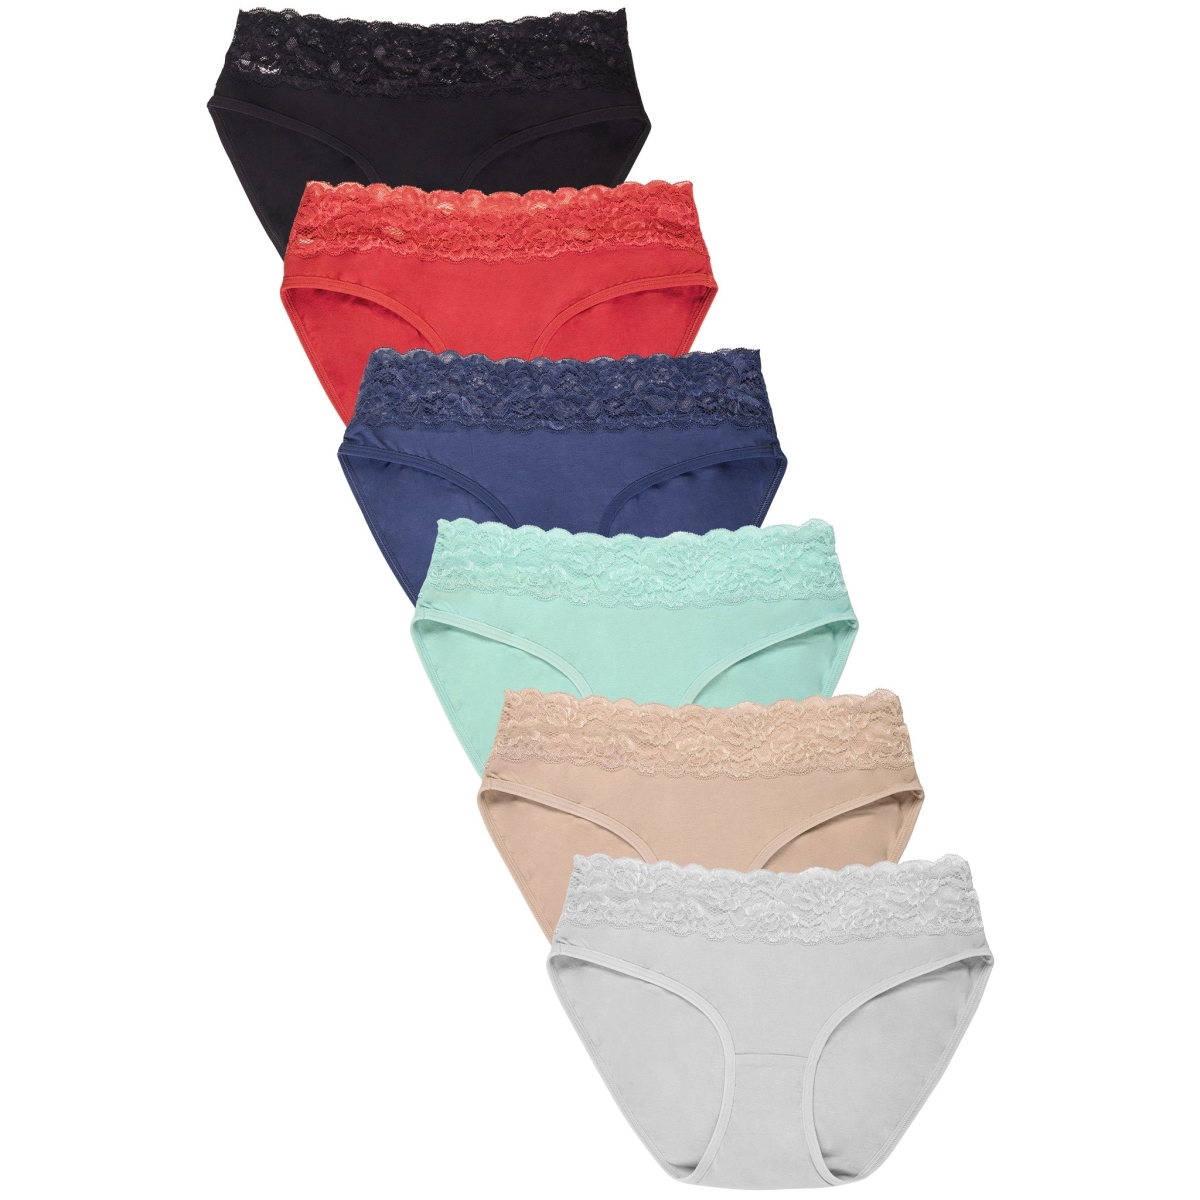 Picture of 247 Frenzy 247-LP1394CK3-LG Womens Essentials Cotton Stretch Bikini Panty Underwear - Assorted Color - Large - Pack of 6